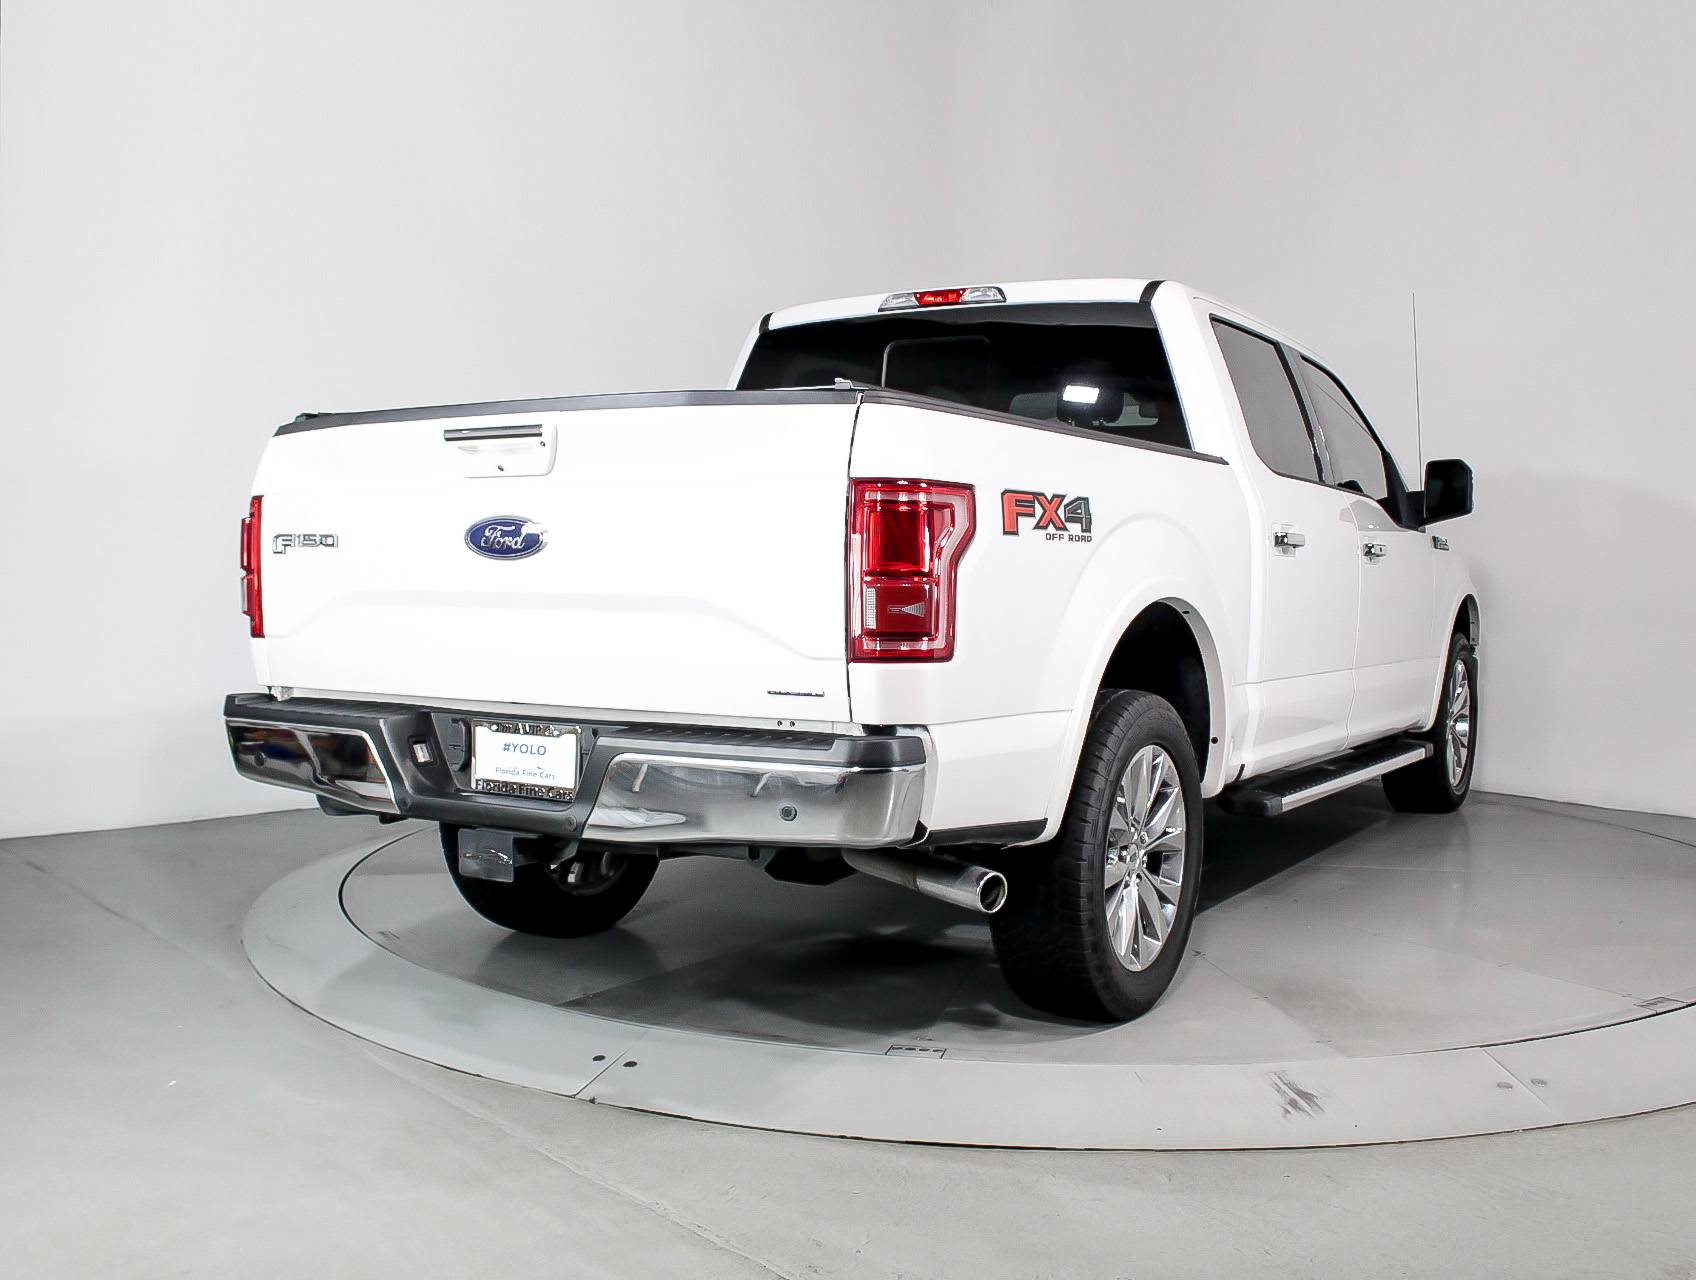 Florida Fine Cars - Used FORD F 150 2016 HOLLYWOOD Lariat Fx4